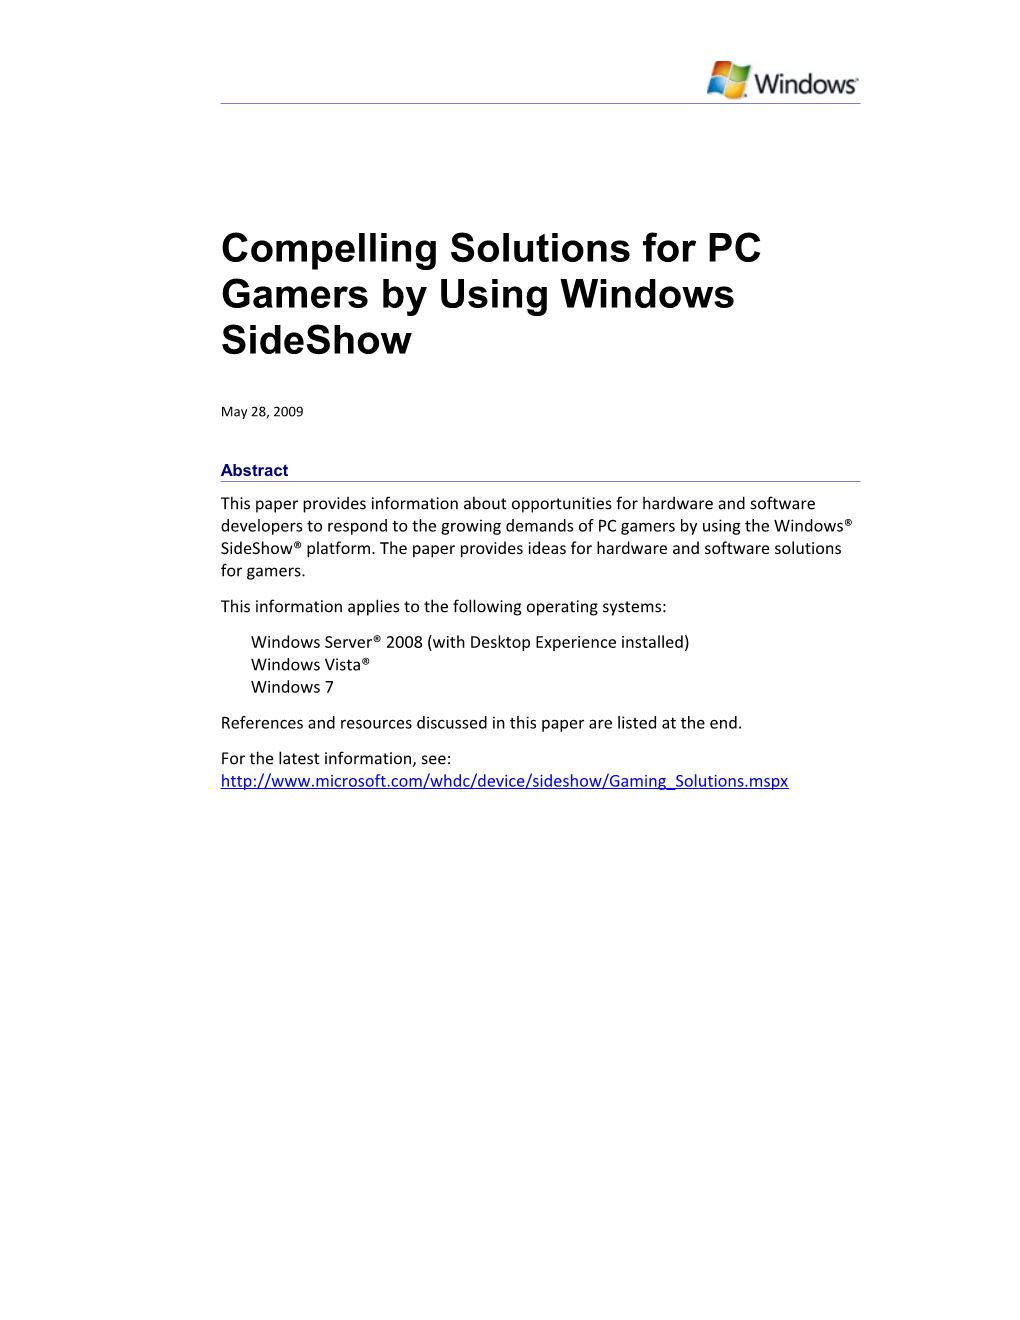 Compelling Solutions for PC Gamers by Using Windows Sideshow - 10